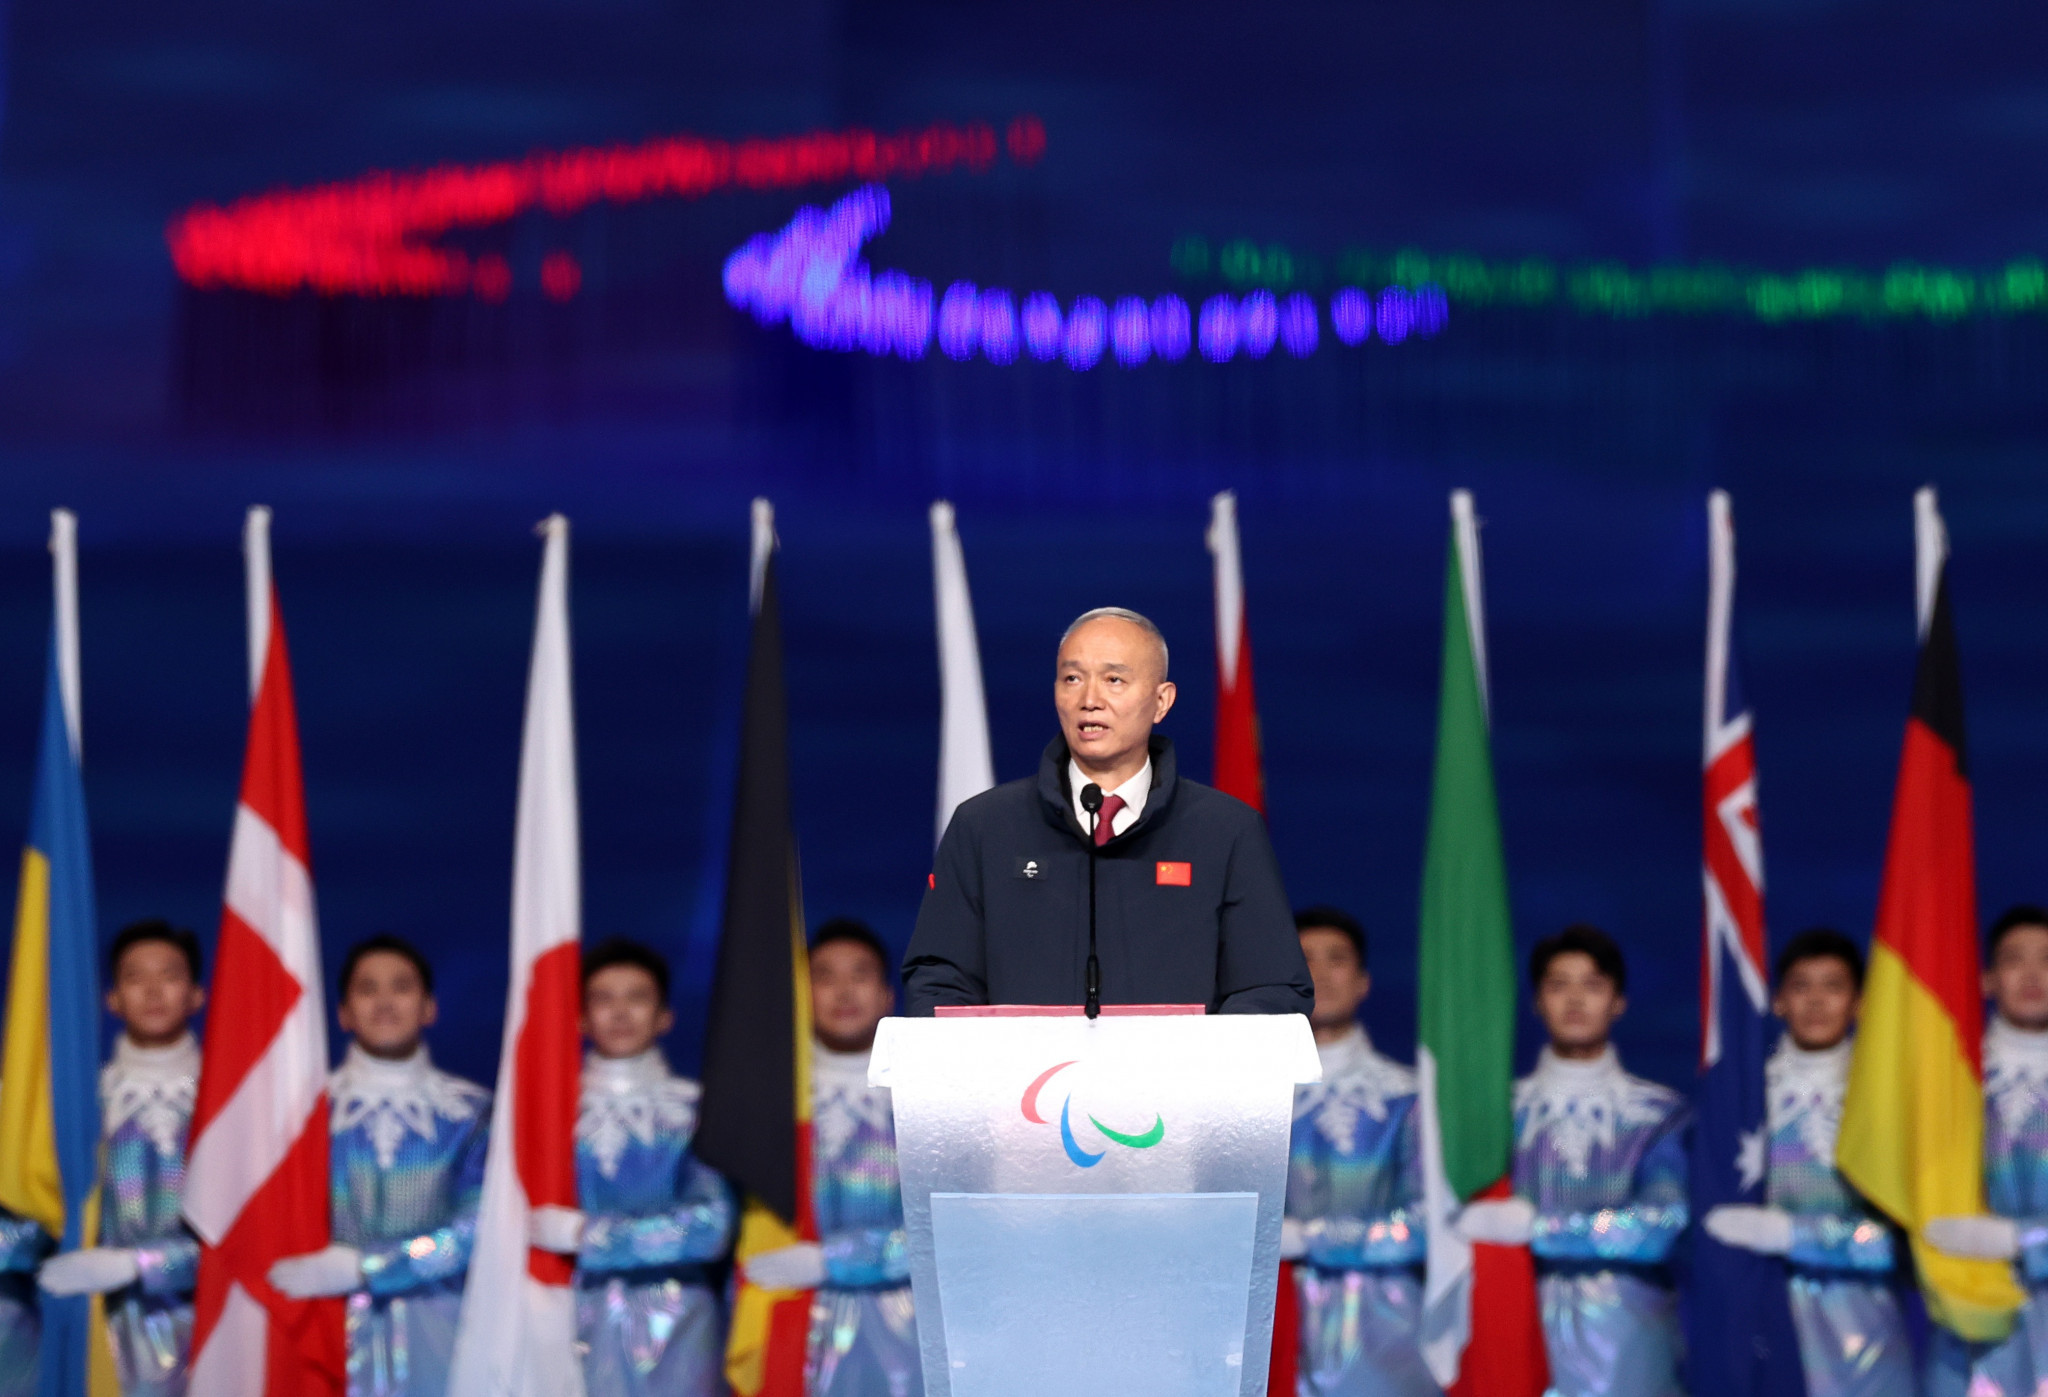 Beijing 2022 President Cai Qi is one of eight recipients of the Paralympic Games Appreciation Token ©Getty Images